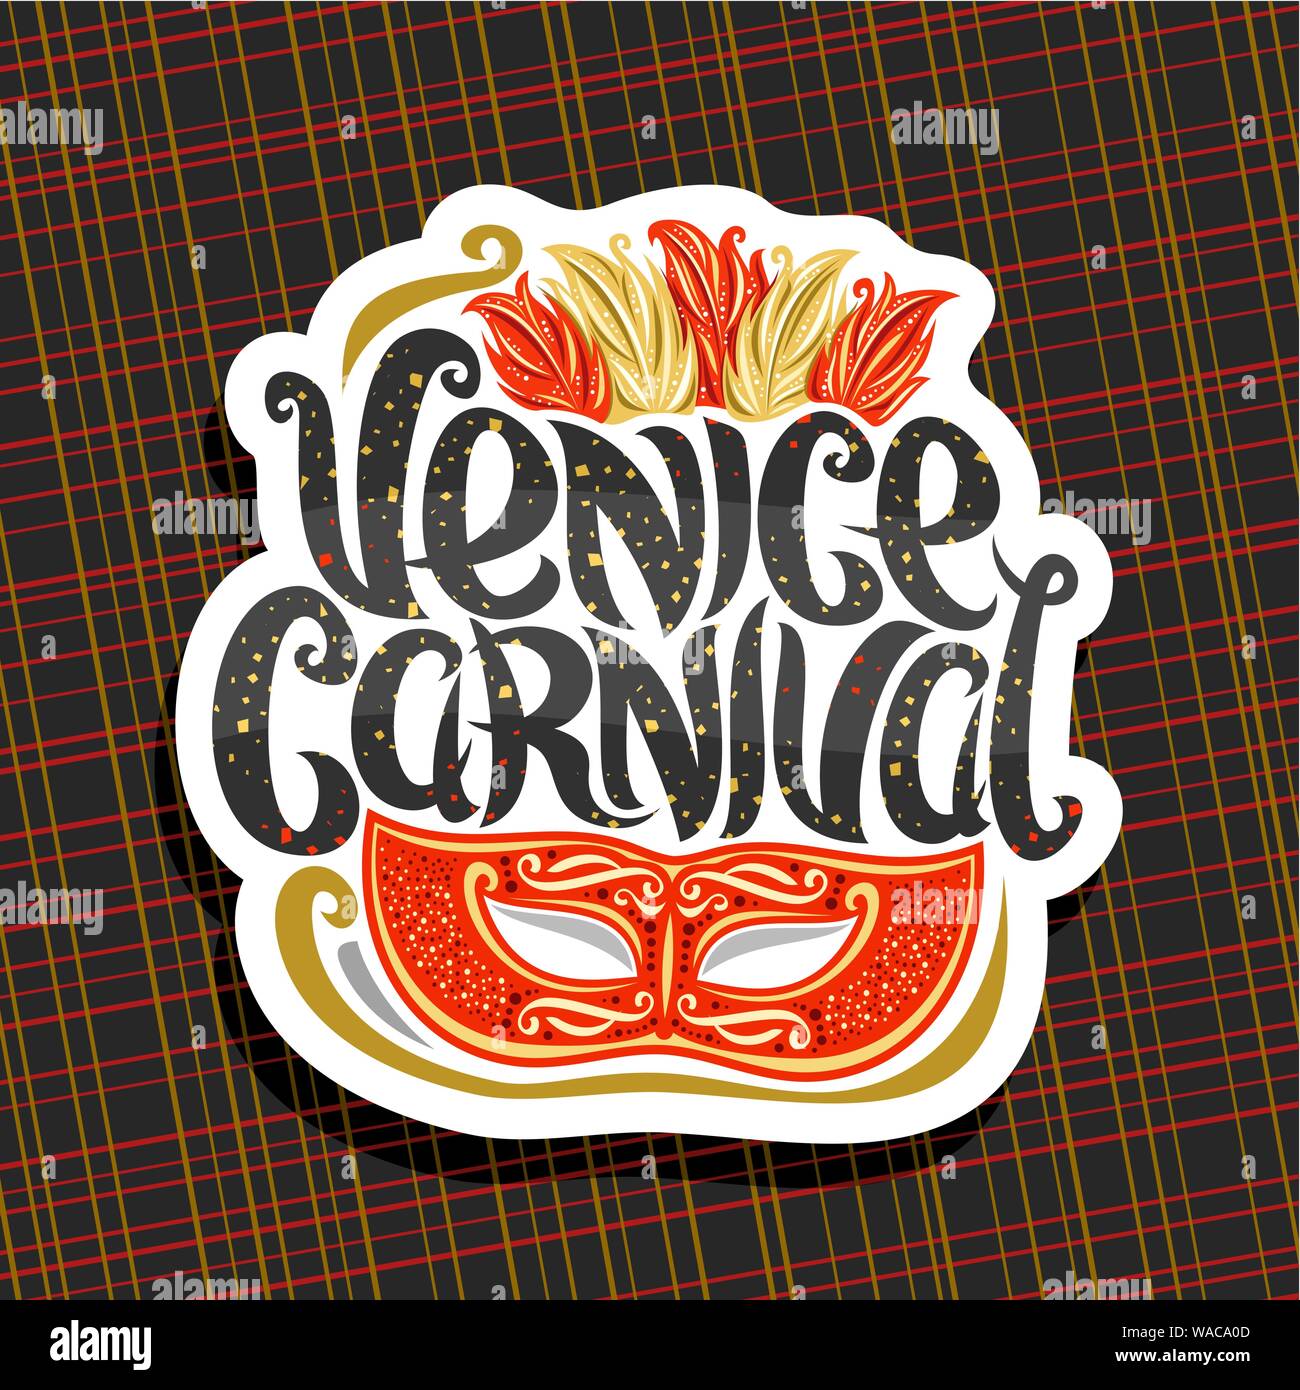 Vector logo for Venice Carnival, cut paper sign with illustration of red masquerade mask, colorful feathers for headdress, elegant handwritten typefac Stock Vector